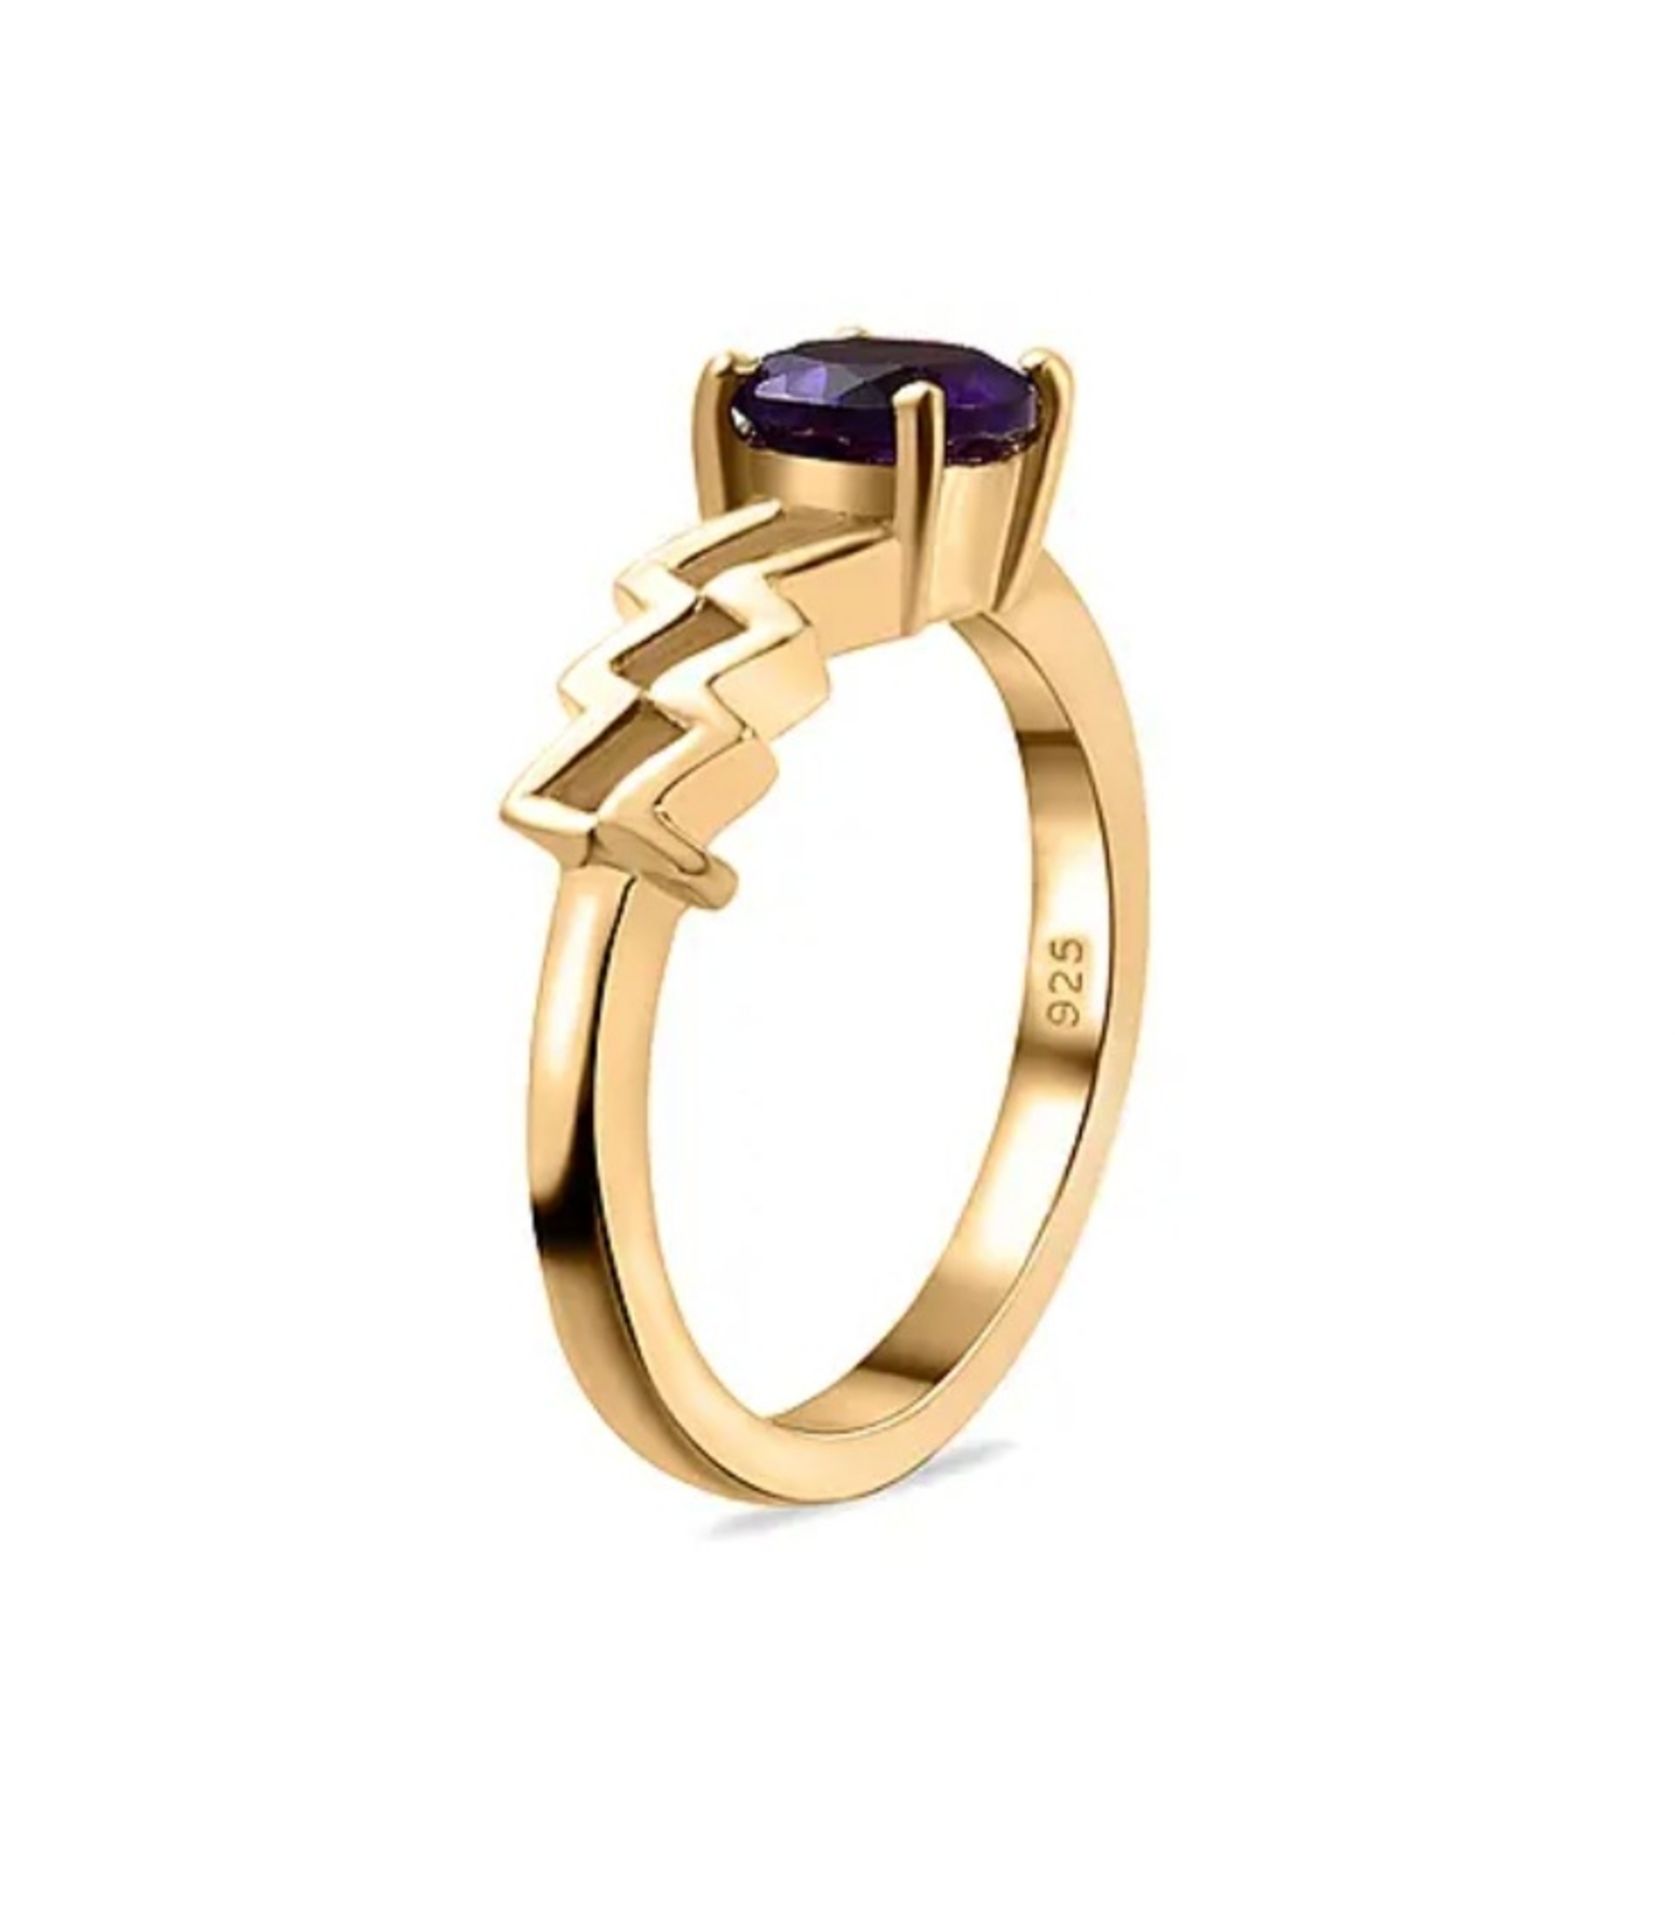 NEW! AA Amethyst Zodiac - Aquarius Ring in 14K Gold Overlay Sterling Silver - Image 4 of 5